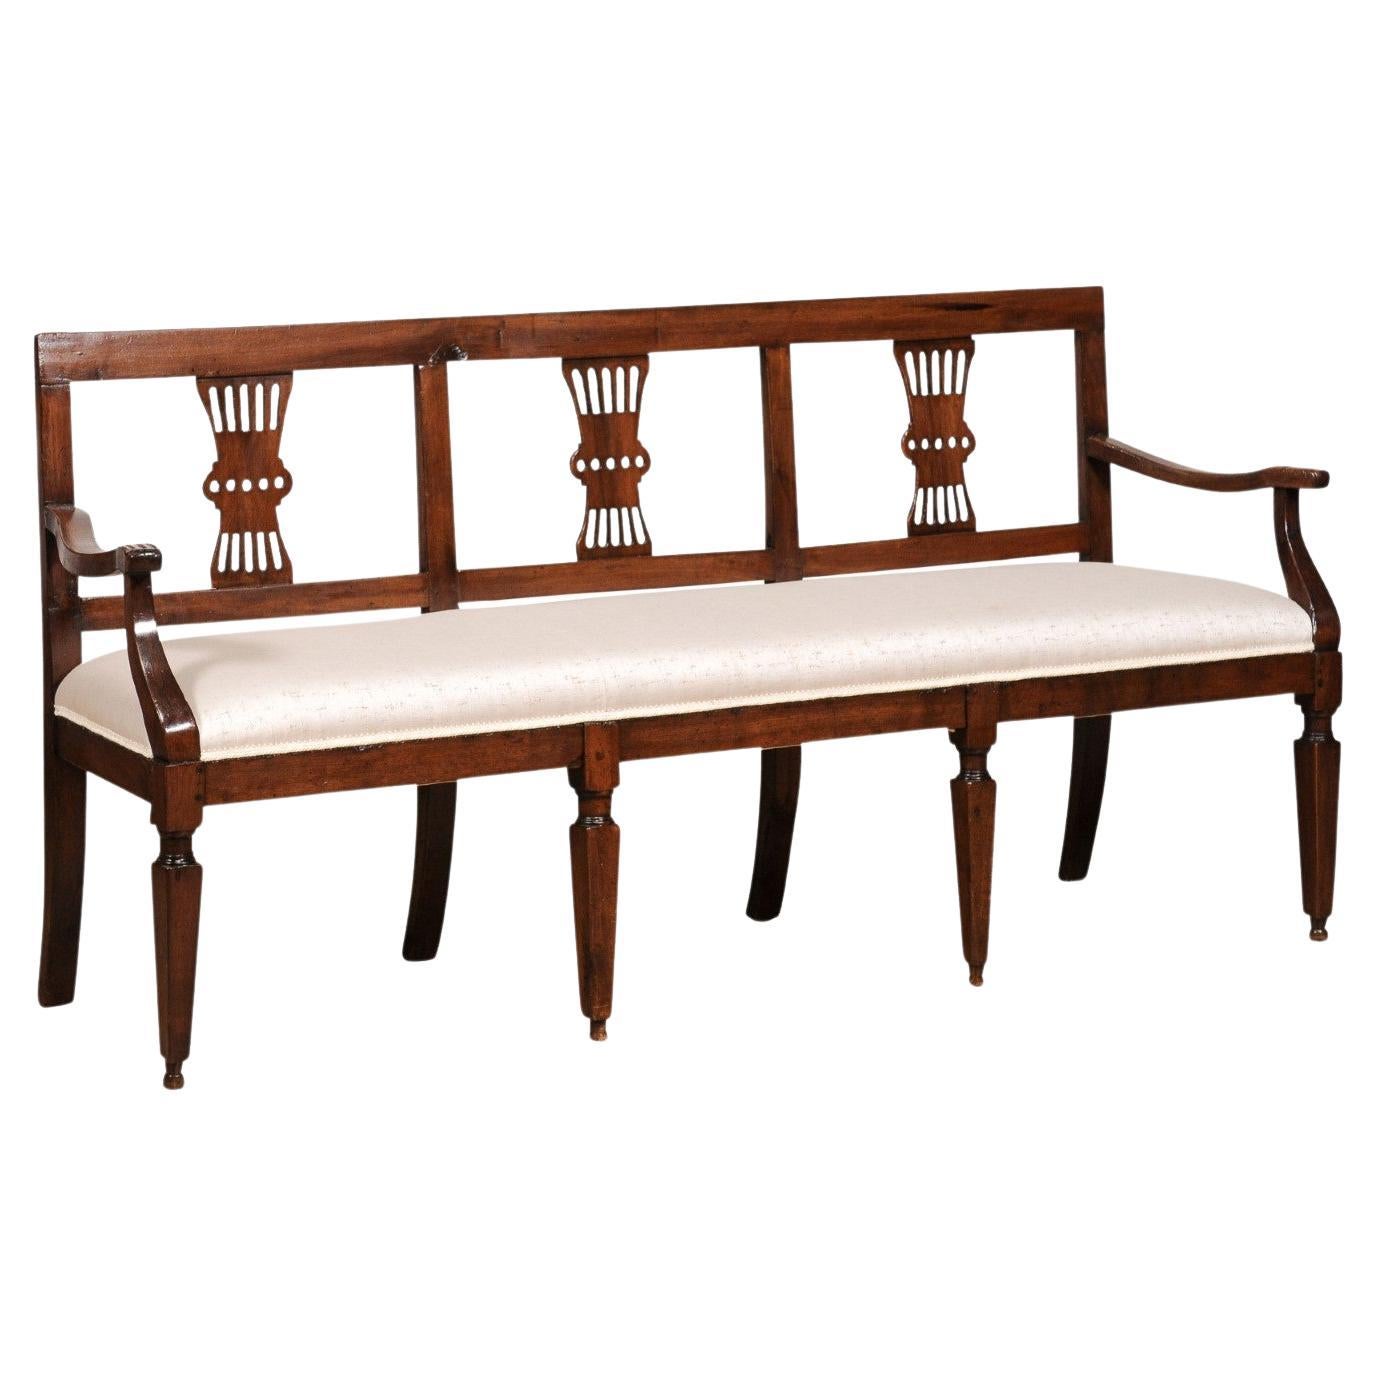 Italian 19th Century Walnut Three-Seater Bench with Carved Splats and Upholstery